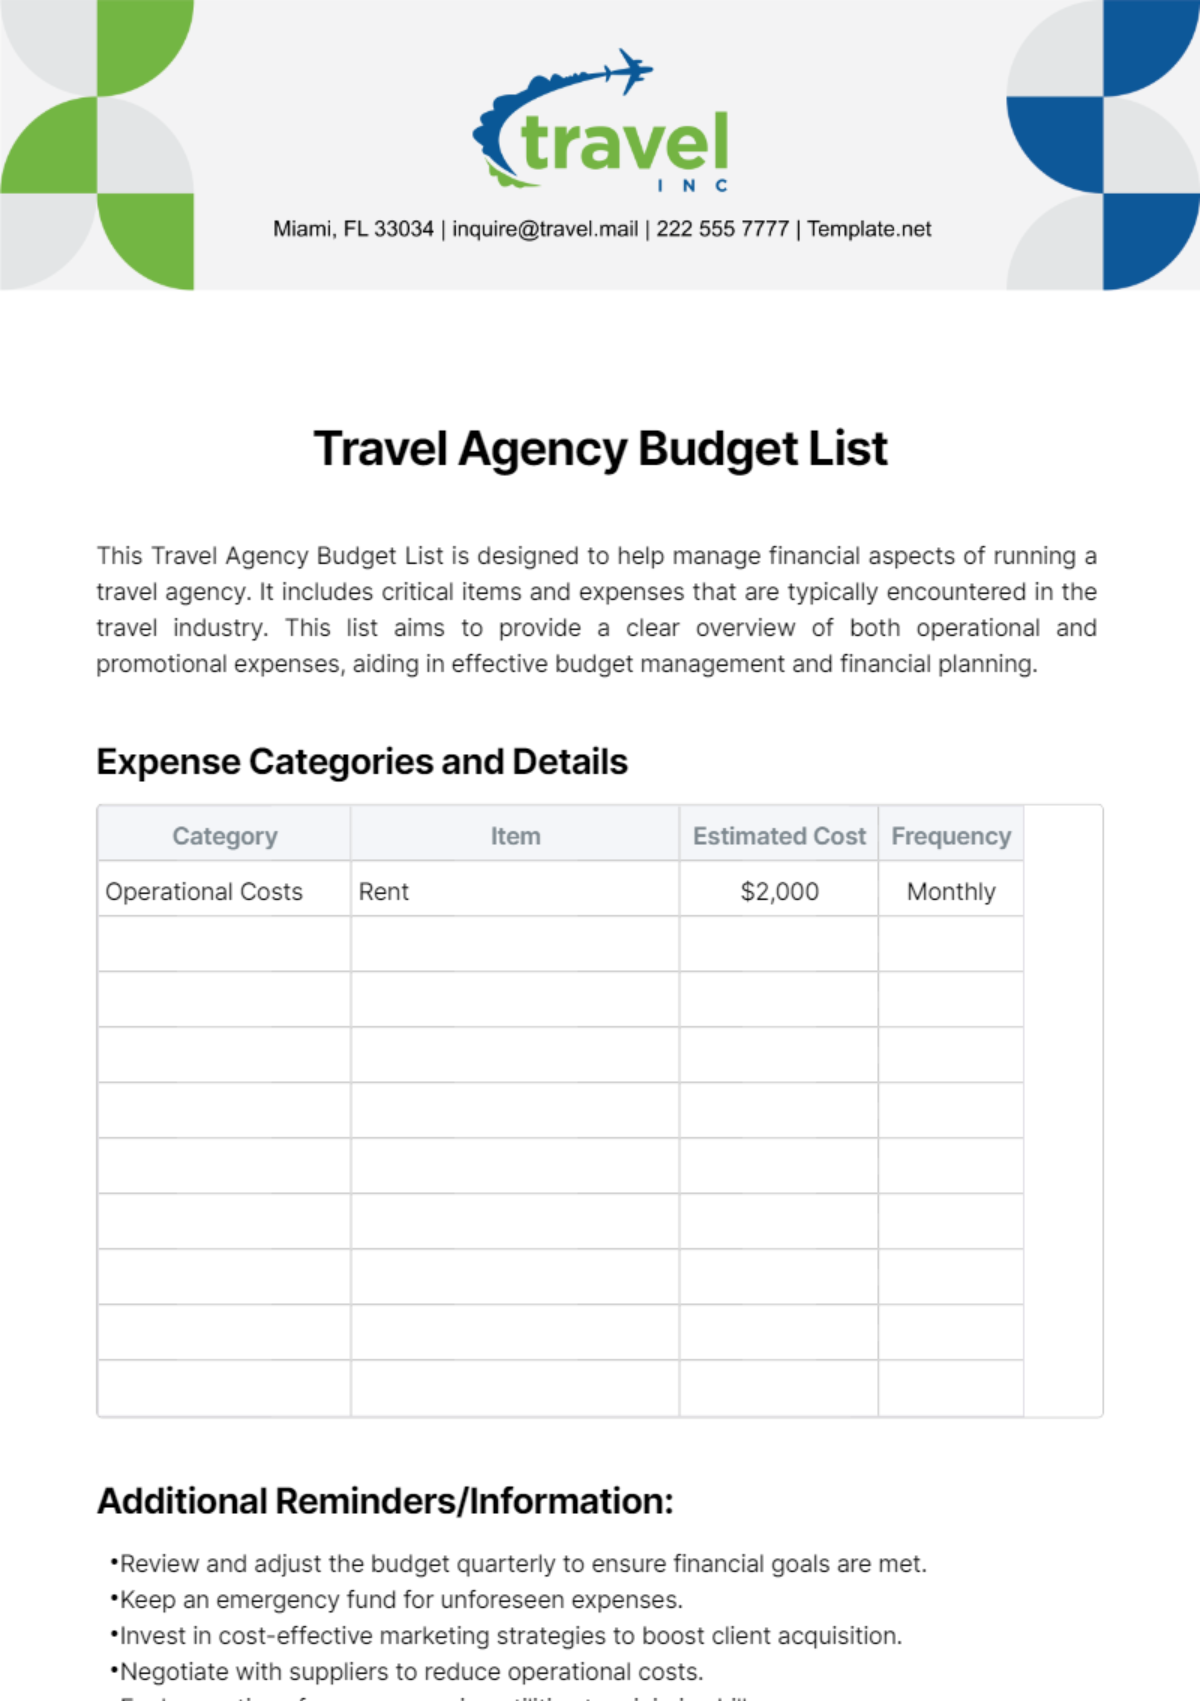 Travel Agency Budget List Template